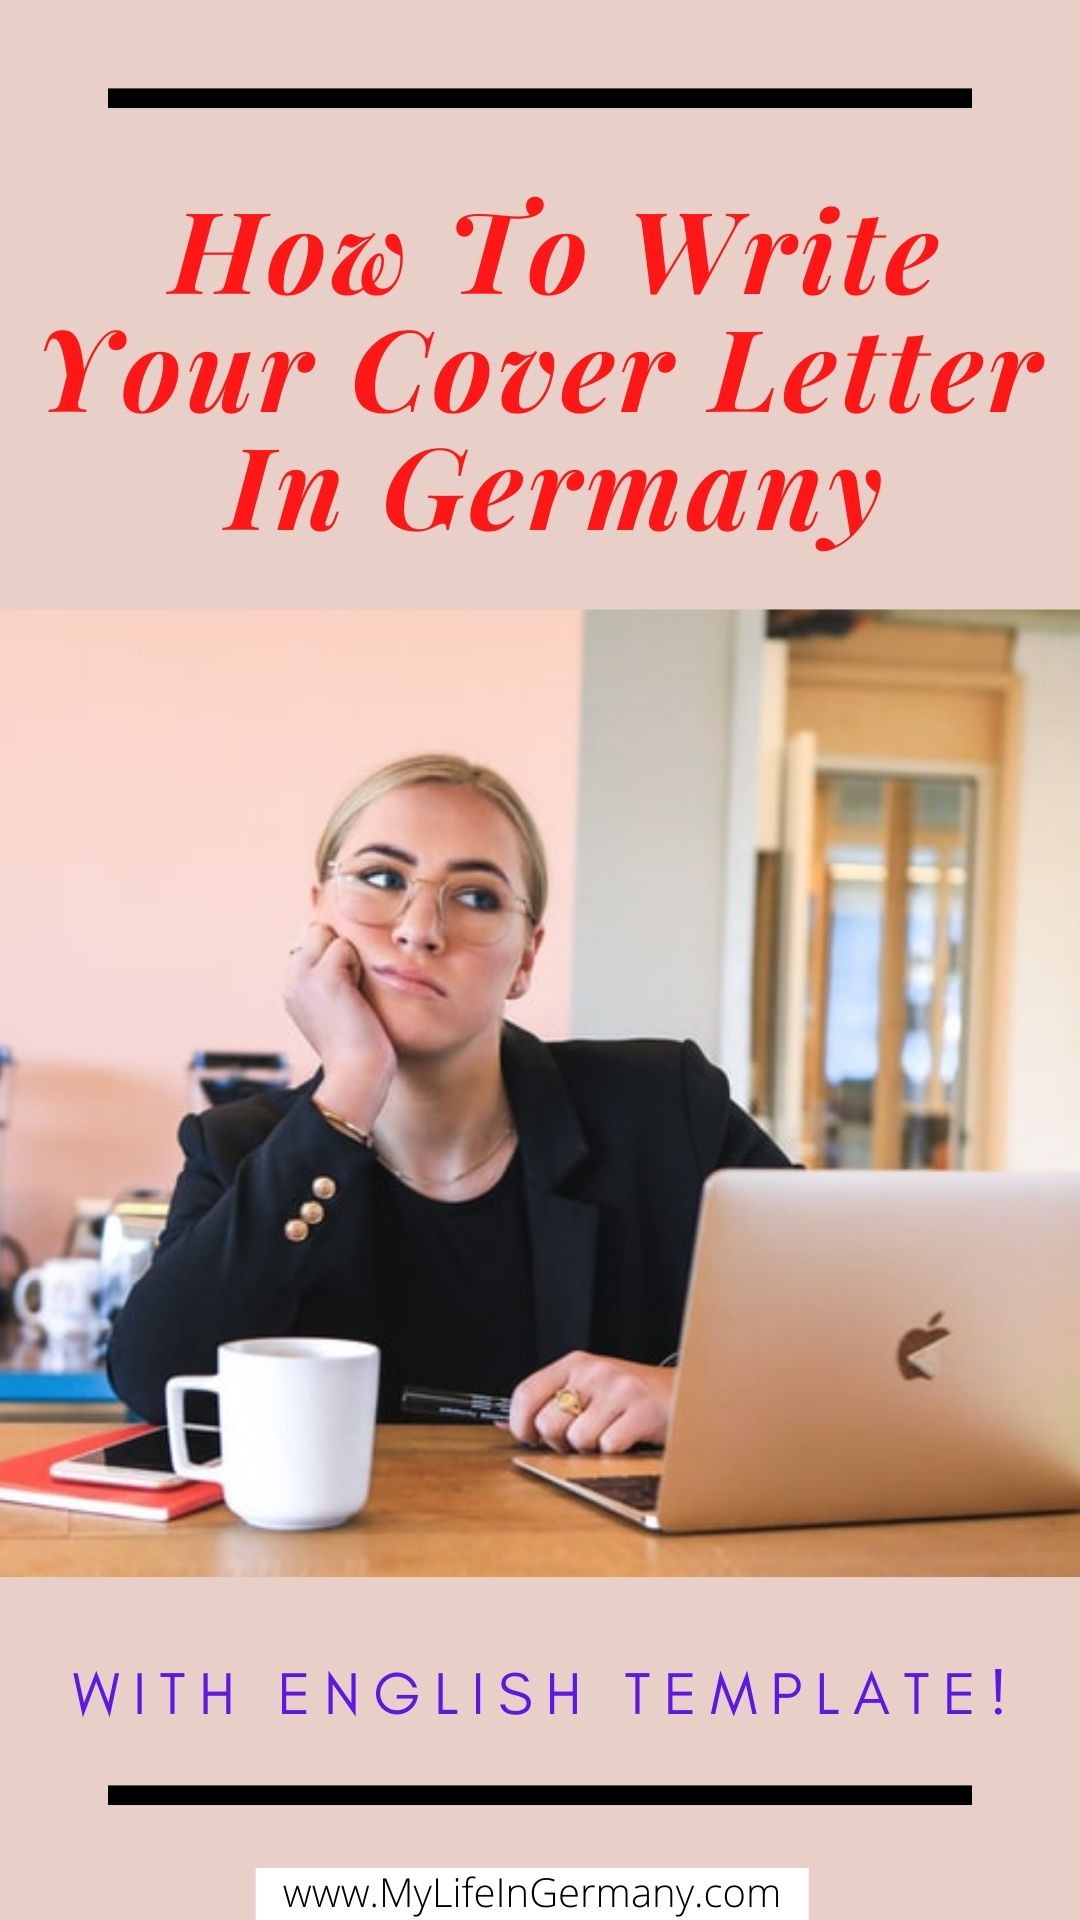 pinterest image edited_how to write your cover letter in germany_english example template_my life in germany_hkwomanabroad